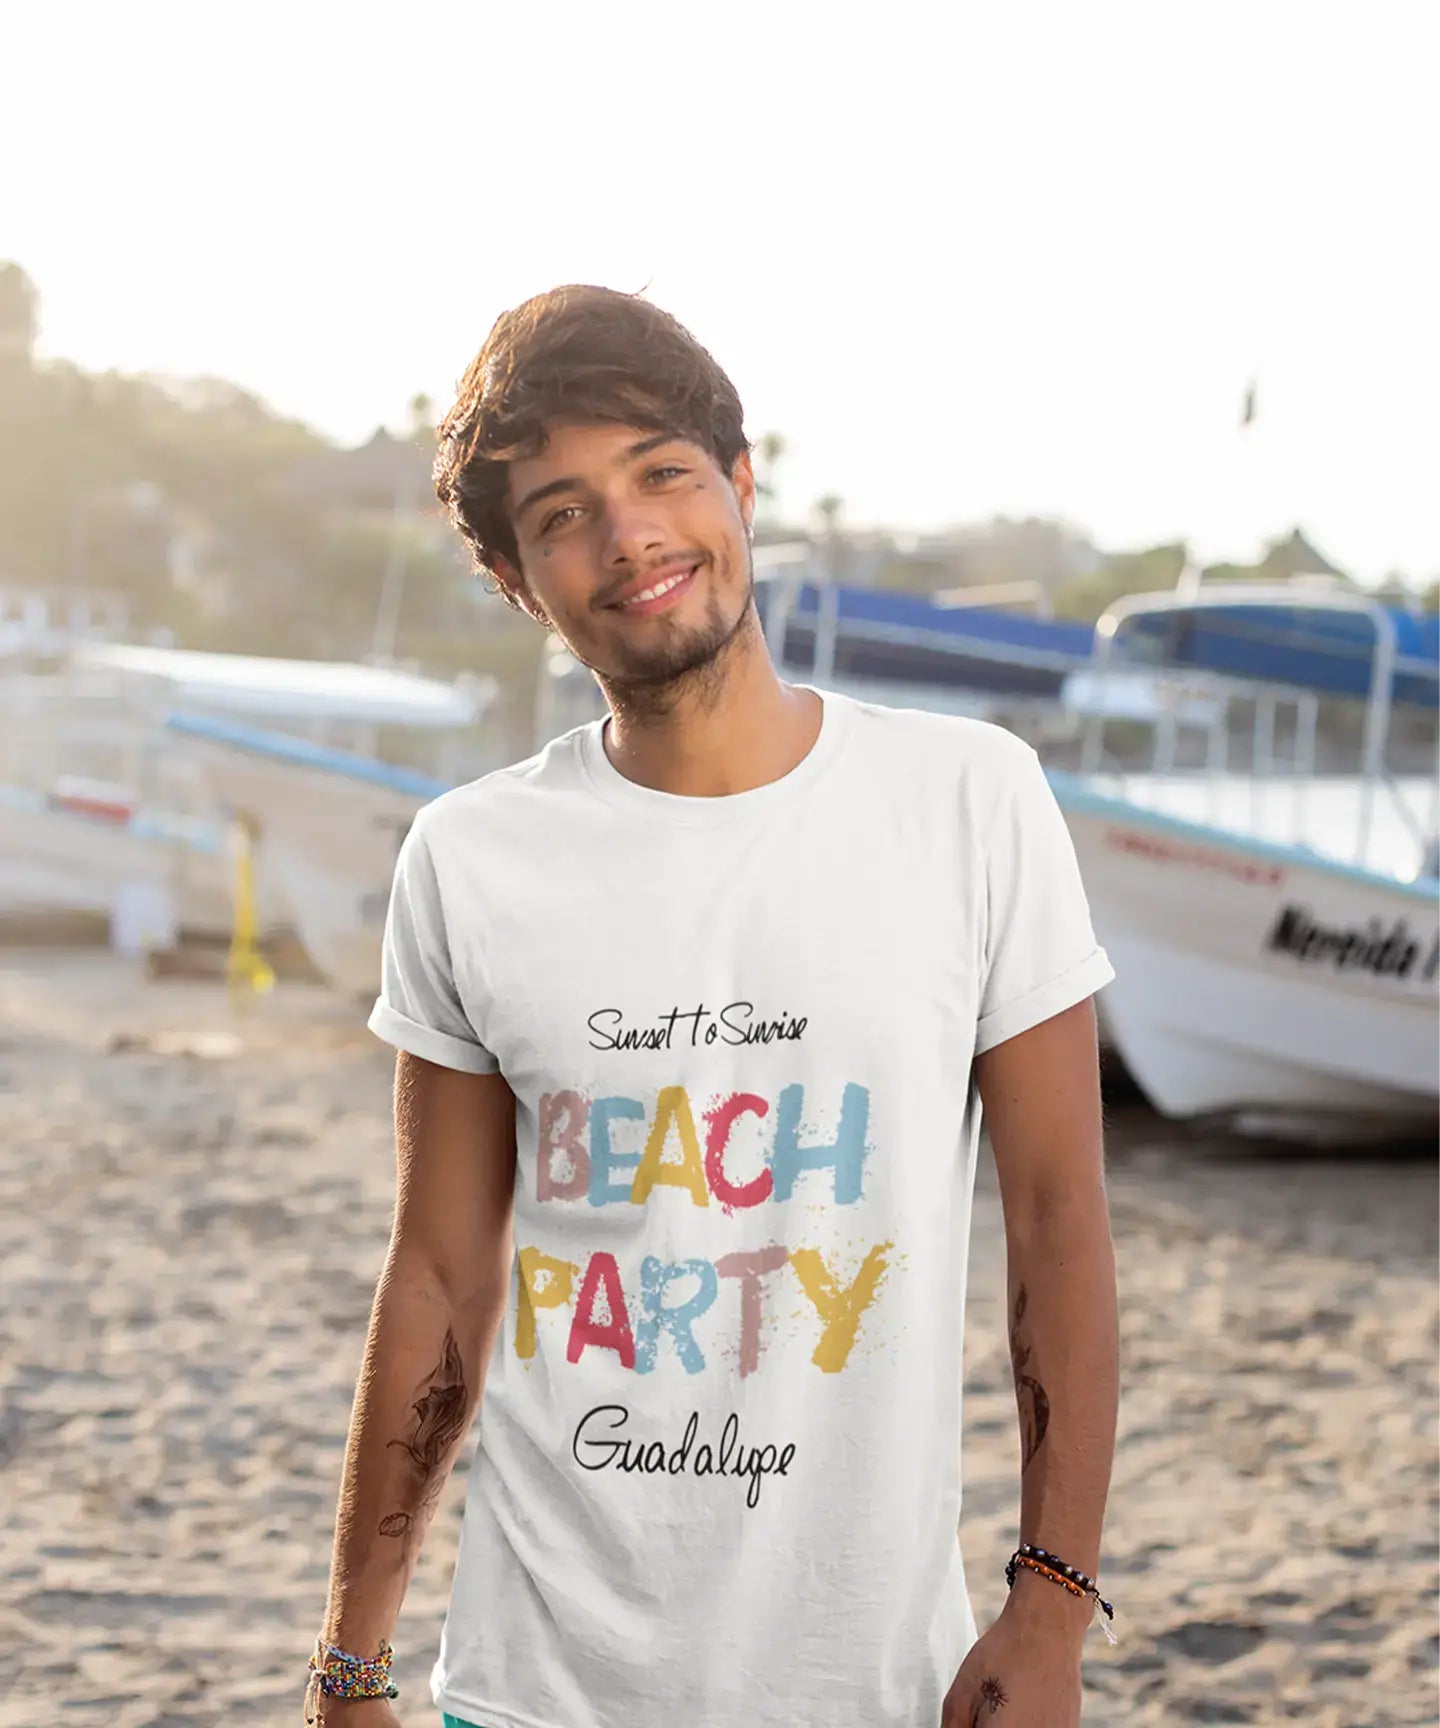 Guadalupe, Beach Party, White, Men's Short Sleeve Round Neck T-shirt 00279